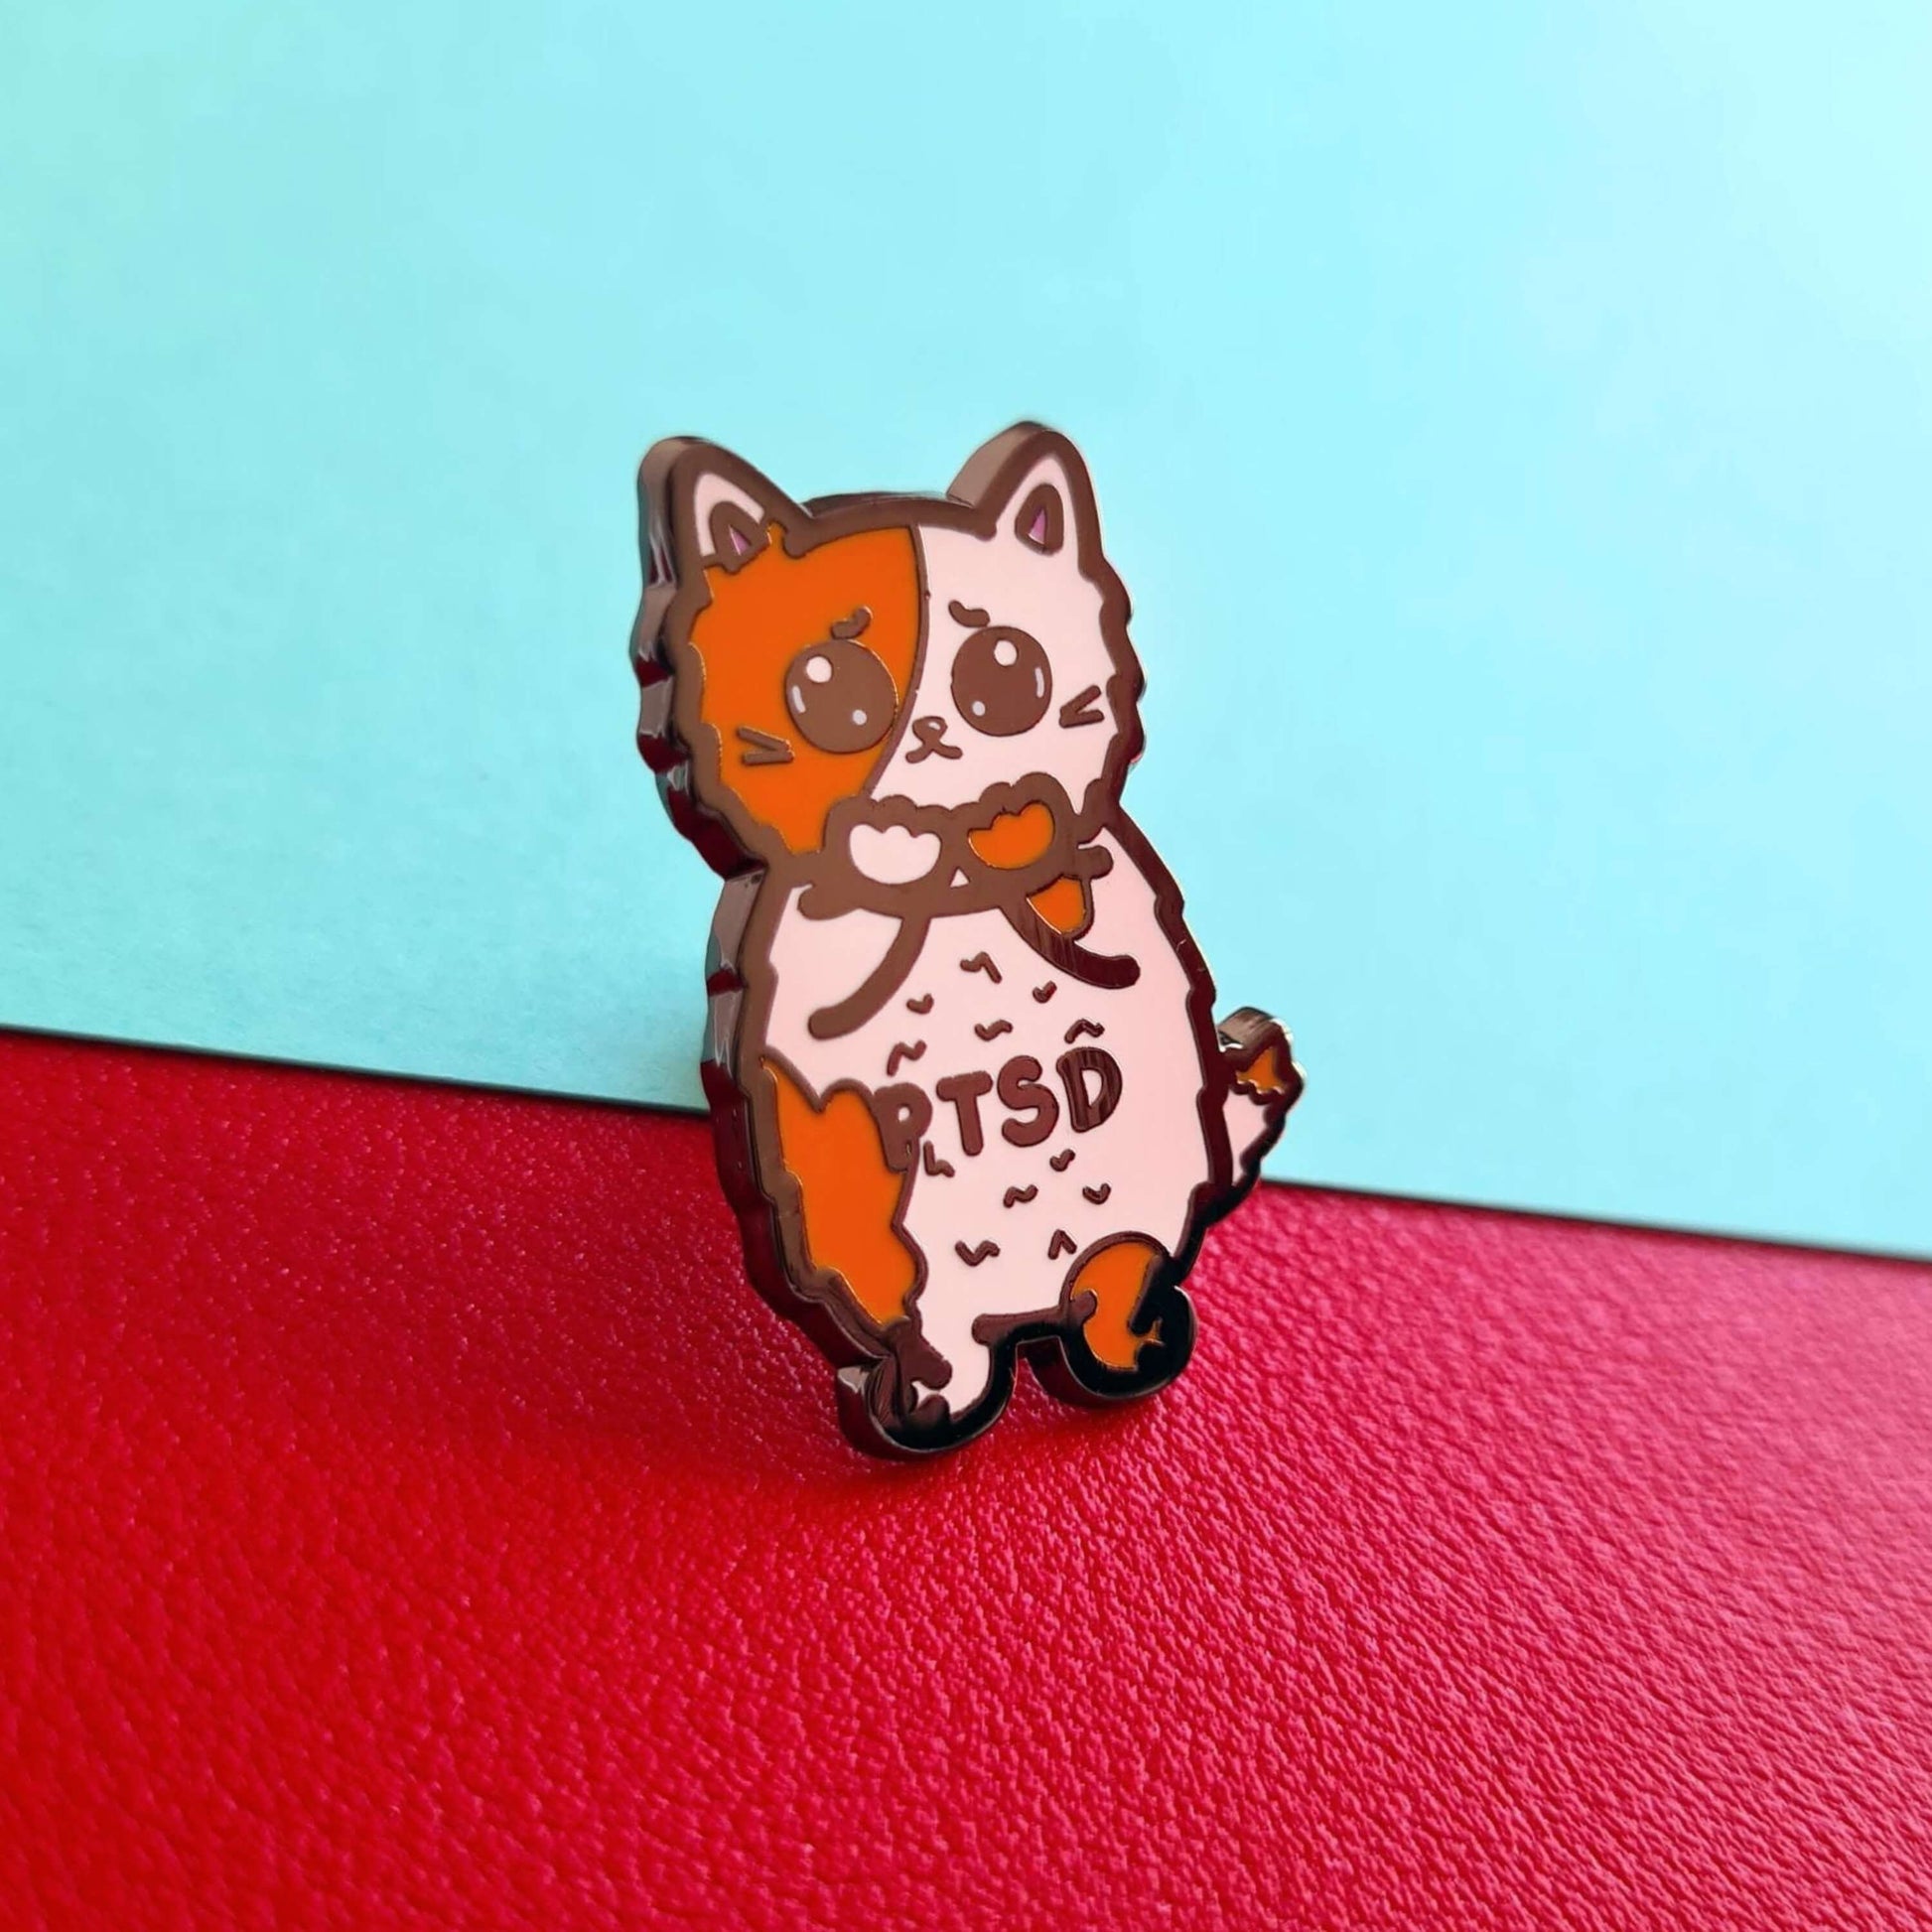 The PTSD Cat Enamel Pin - Post-Traumatic Stress Disorder on a red and blue background. An orange and white scared cat with black text across its belly reading 'PTSD'. The hand drawn design is raising awareness for post traumatic stress disorder.